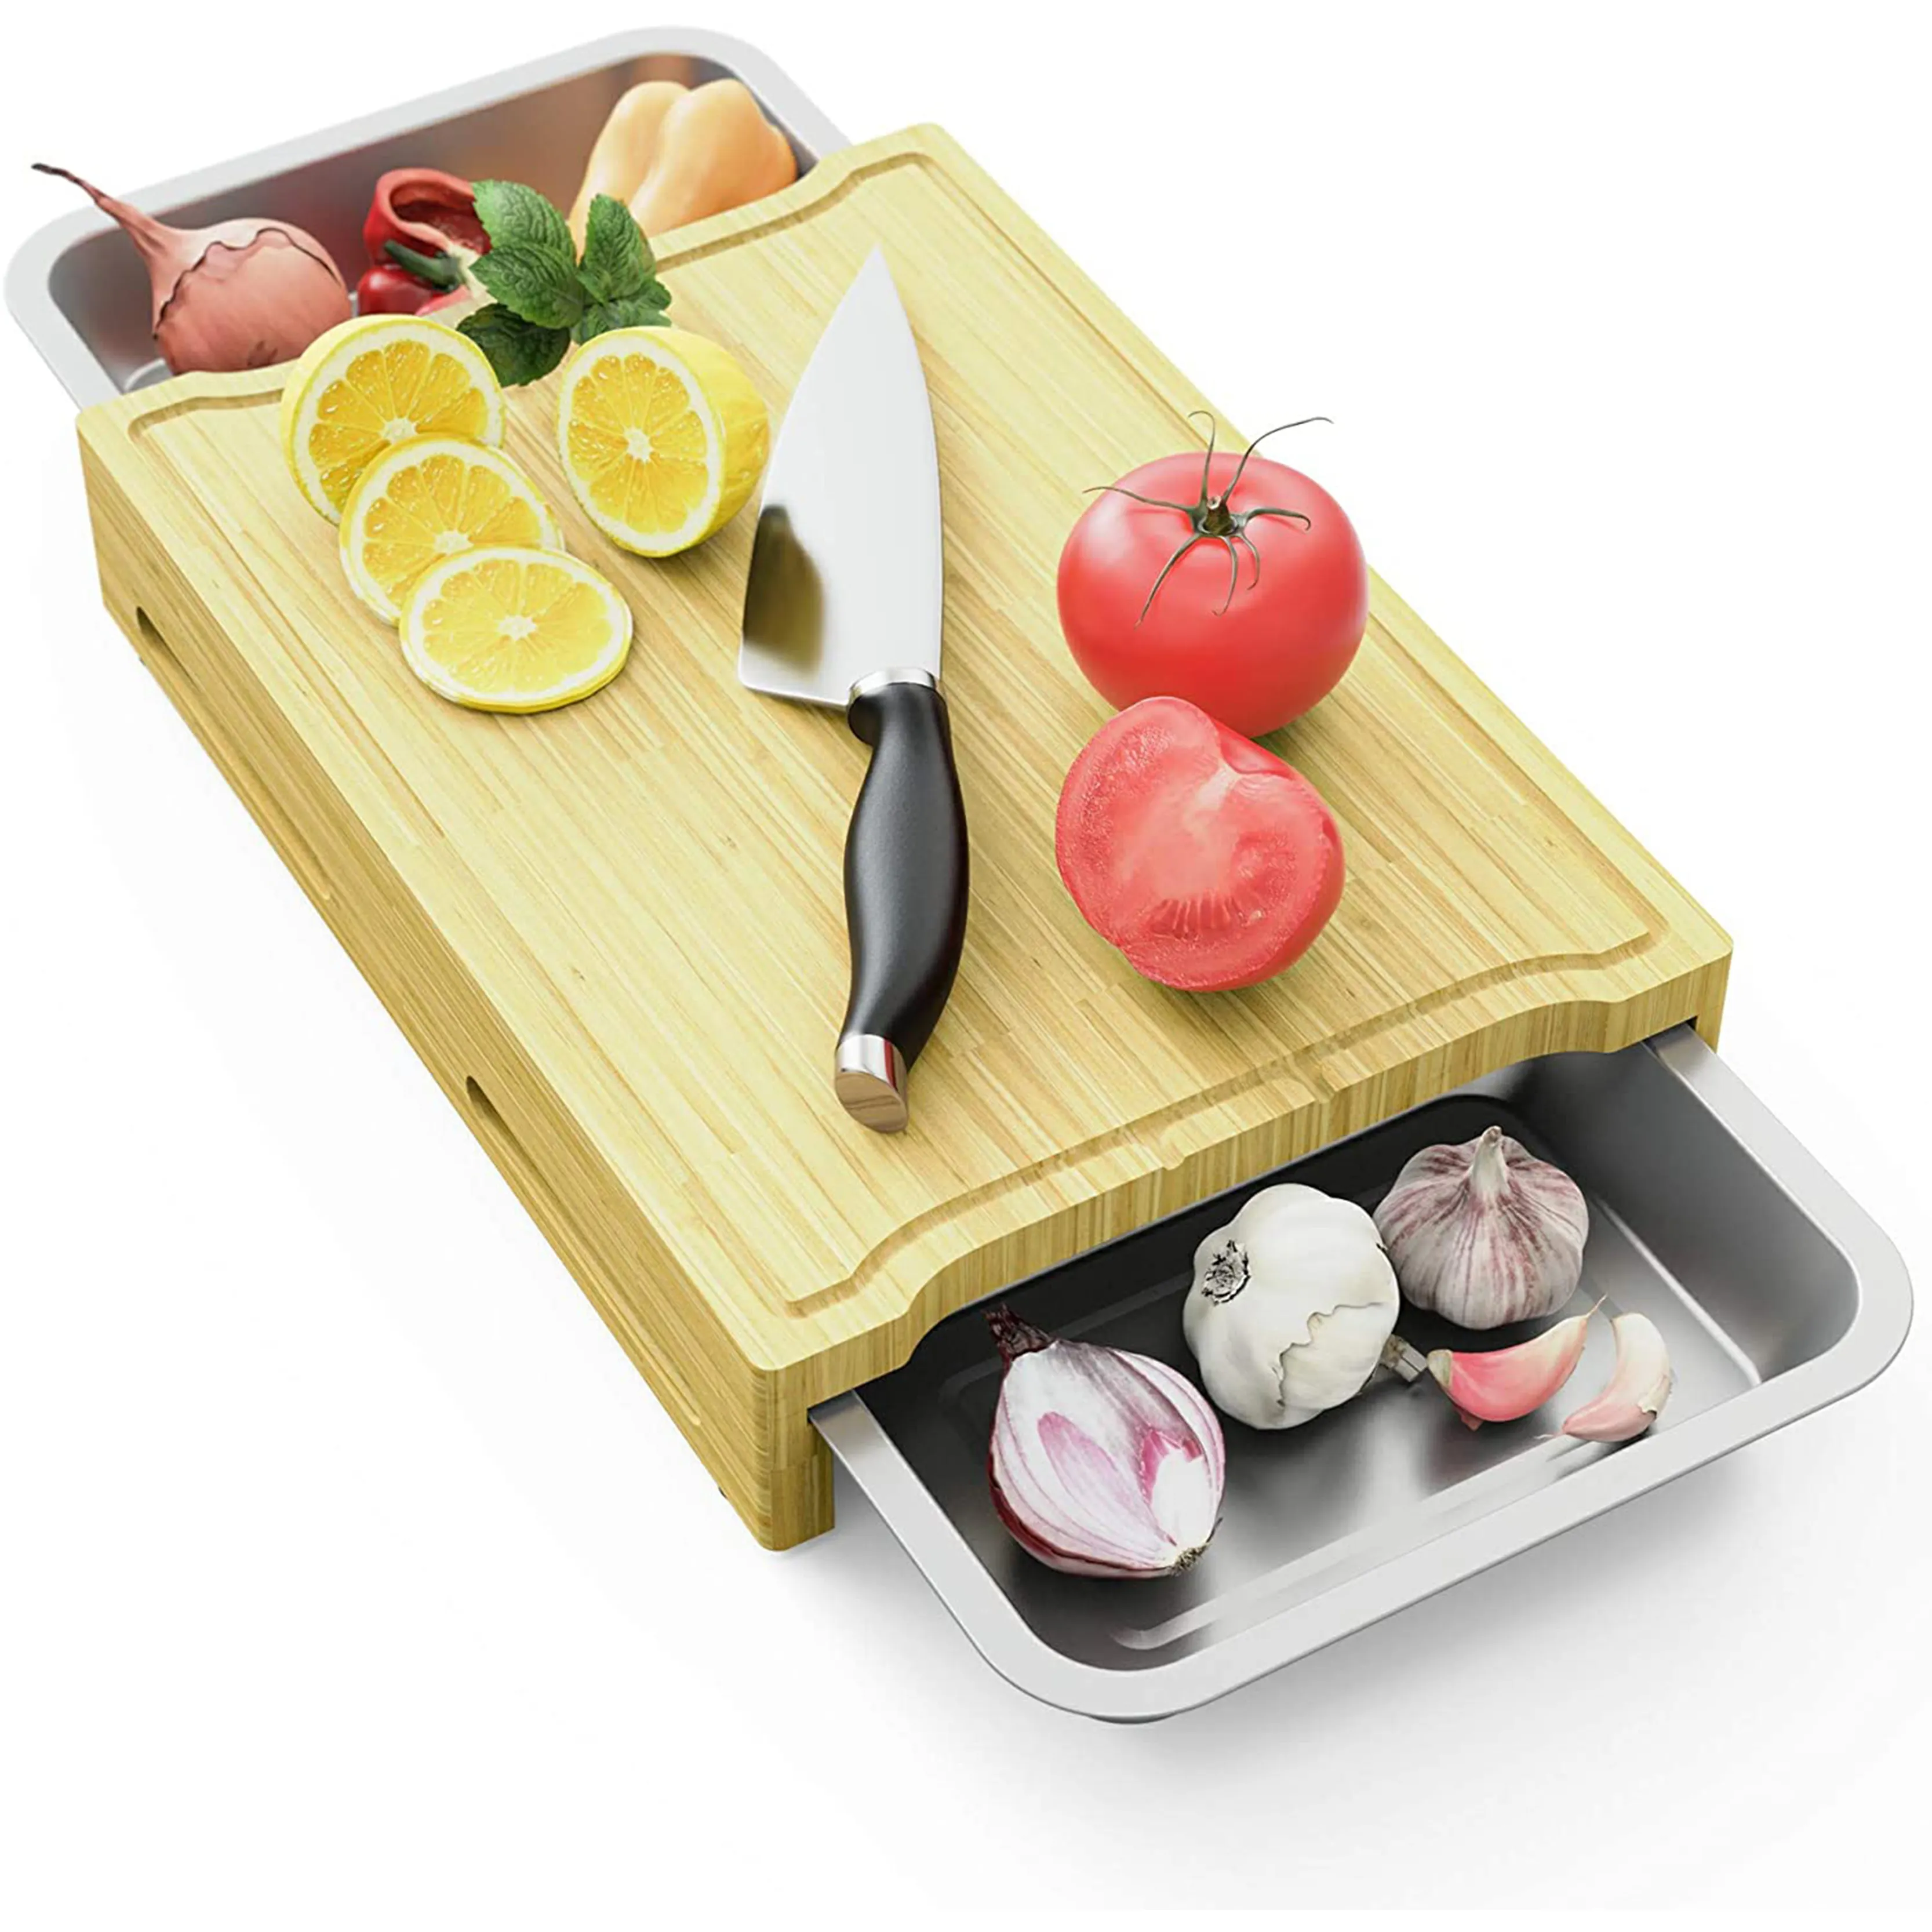 Chopping Bamboo Cutting Boards Custom Kitchen Stainless Steel Bamboo Wood Chopping Cutting Board Set With Containers Tray